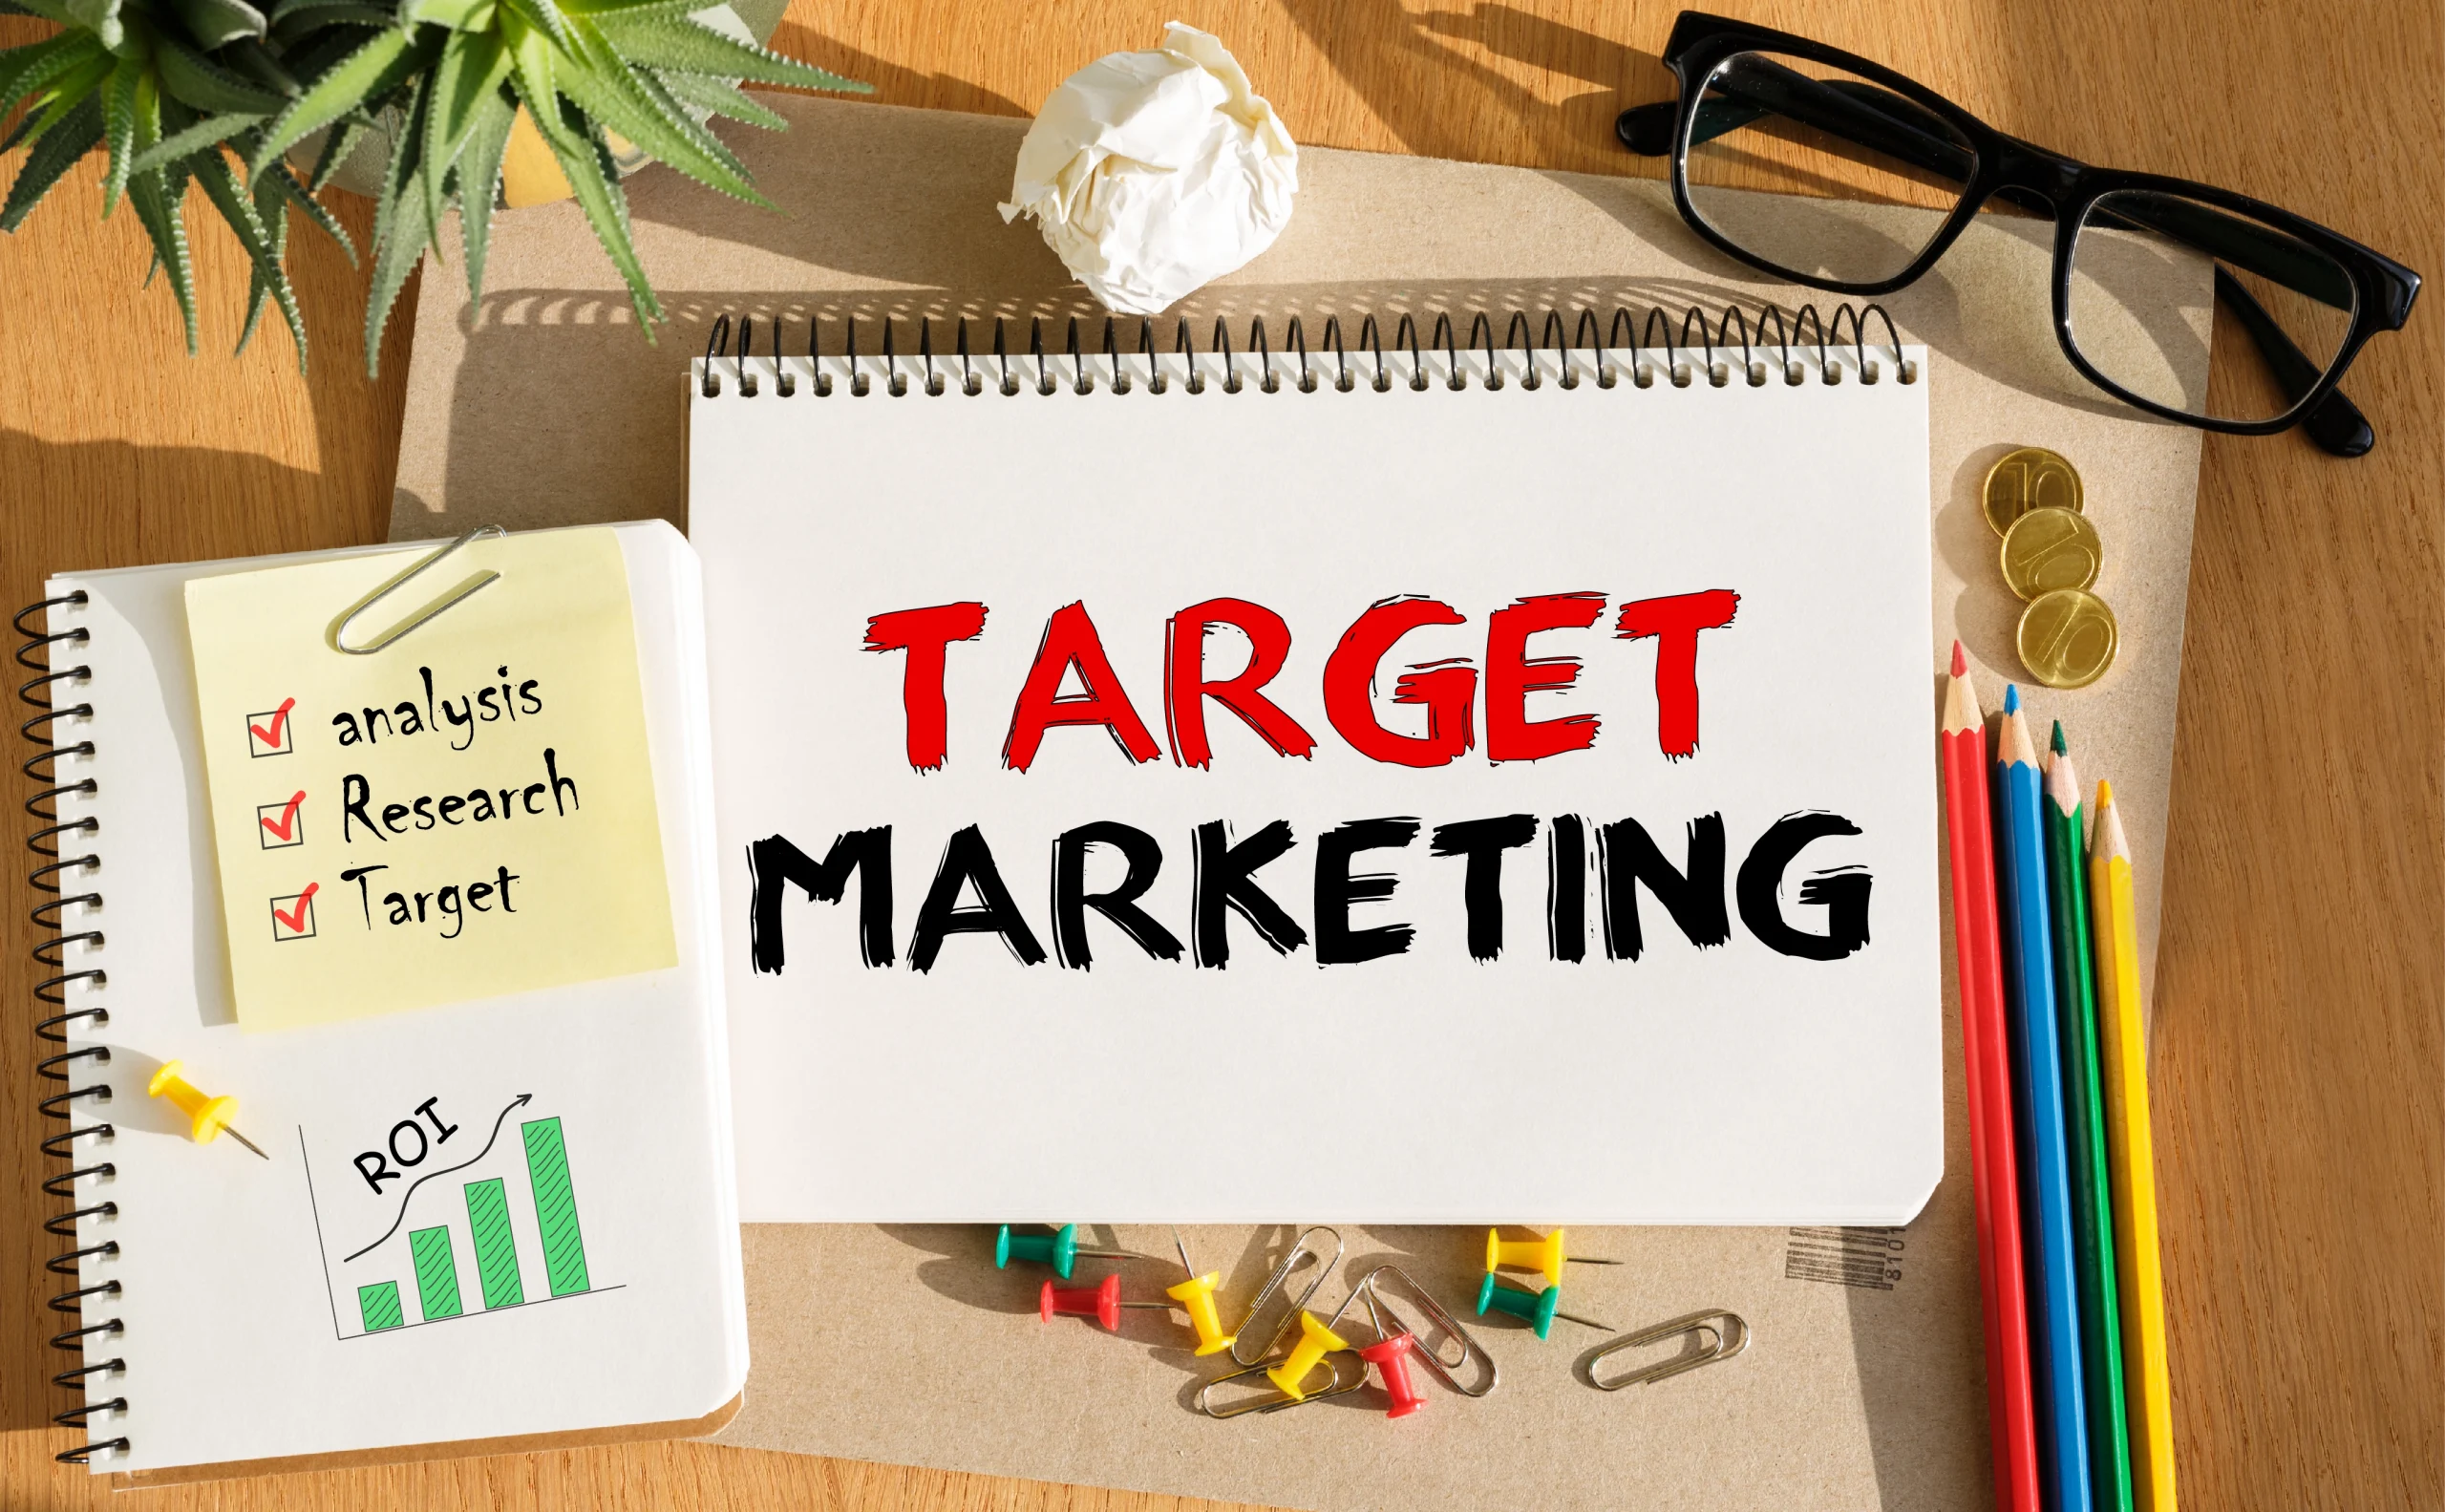 Segmenting Your Email List for Targeted Campaigns